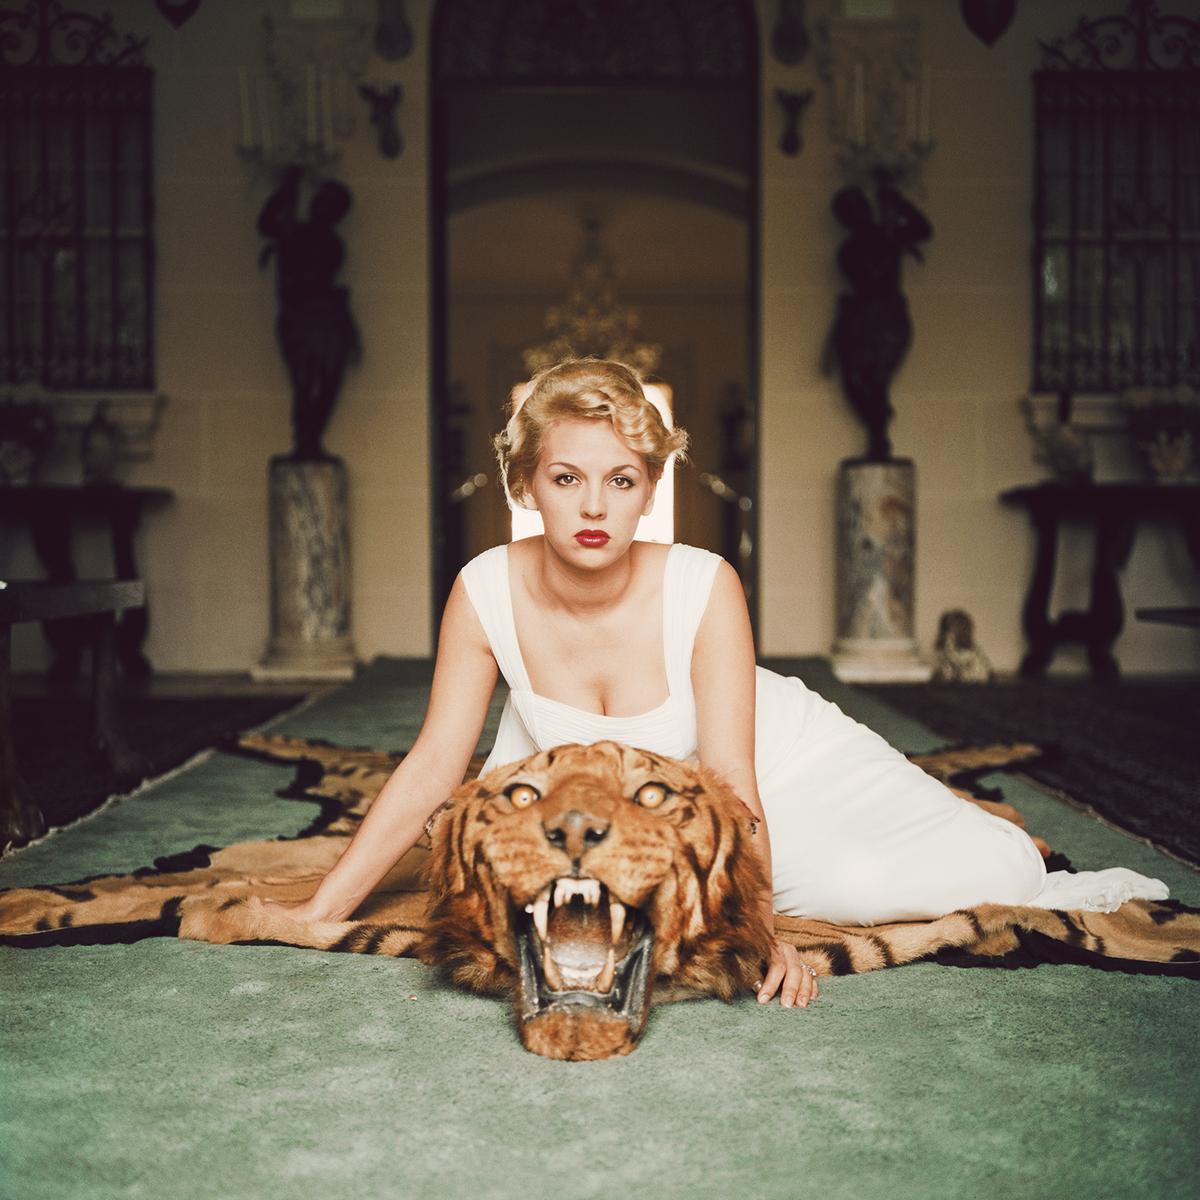 Beauty and the Beast 

1959

Lady Daphne Cameron (Mrs George Cameron) on a tiger skin rug in the trophy room at socialite Laddie Sanford’s home in Palm Beach, Florida.

Photo by Slim Aarons

12 x 12” / 30 x 30 cm paper size 
Archival pigment